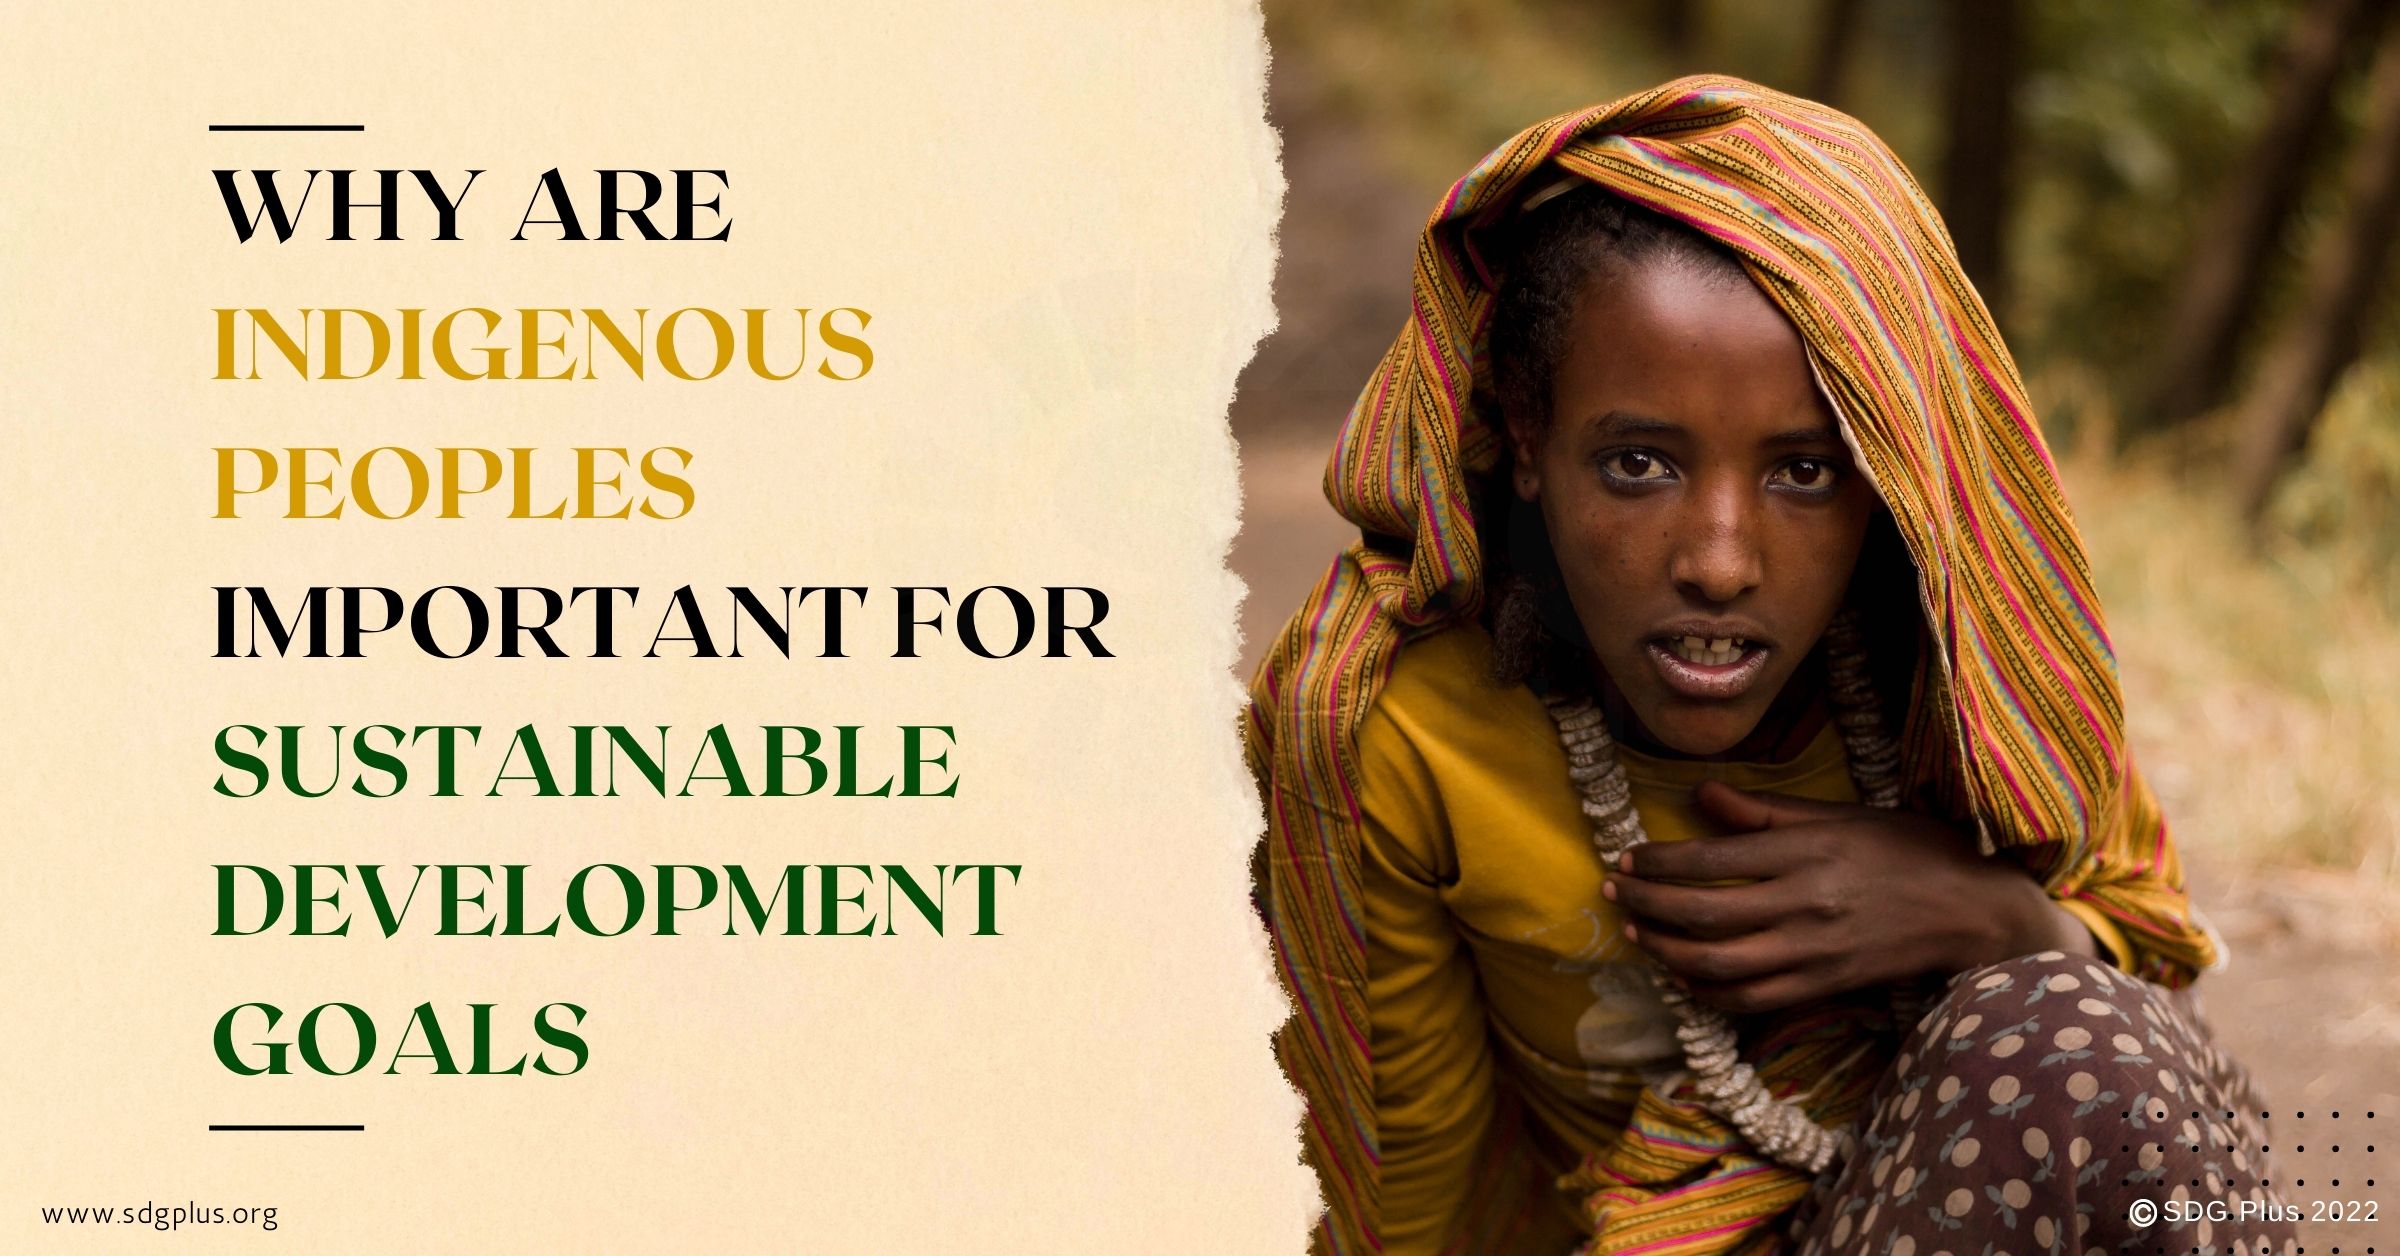 Role of Indigenous Peoples for Sustainable Development Goals